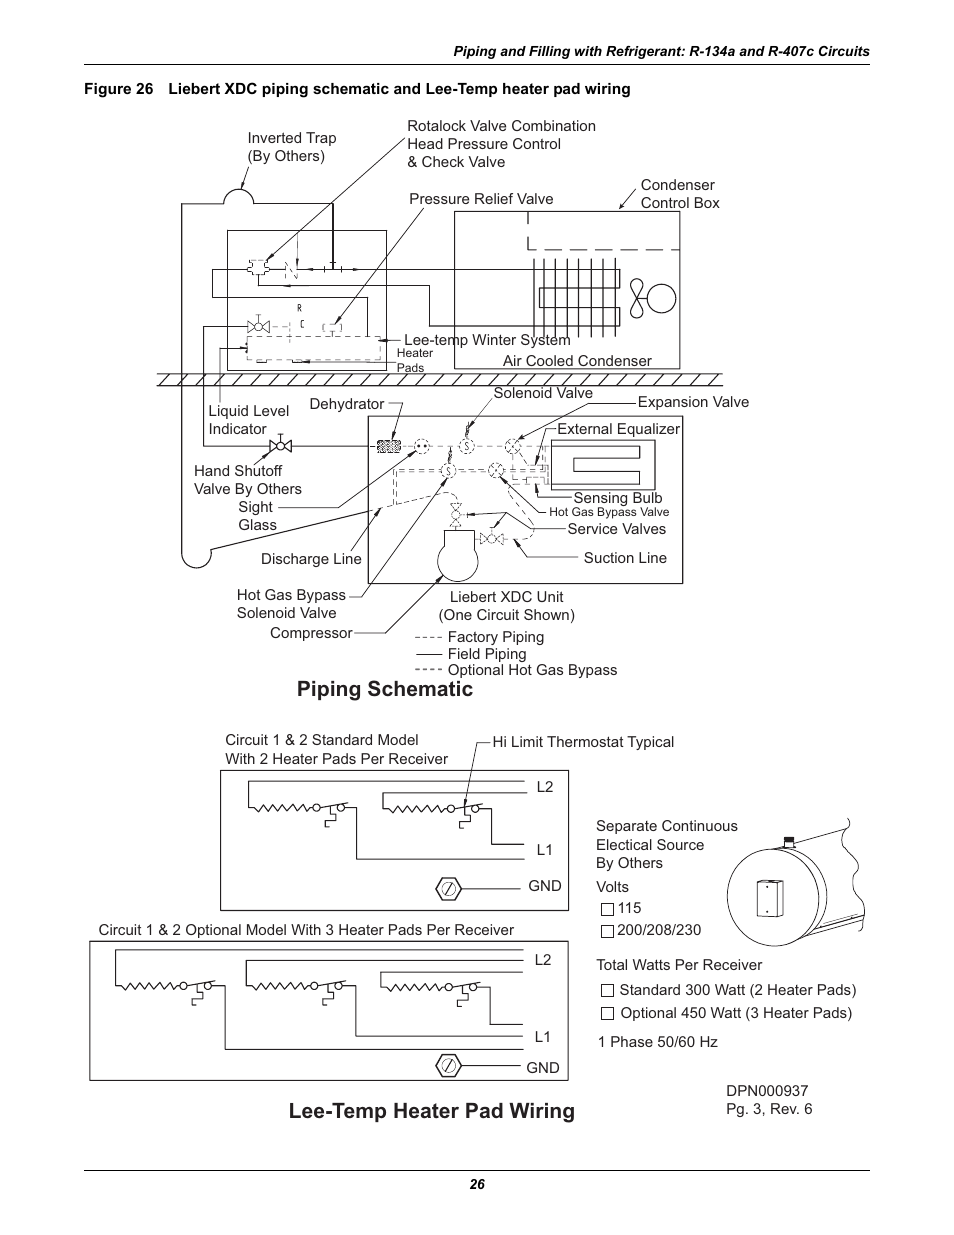 Piping Schematic Lee Temp Heater Pad